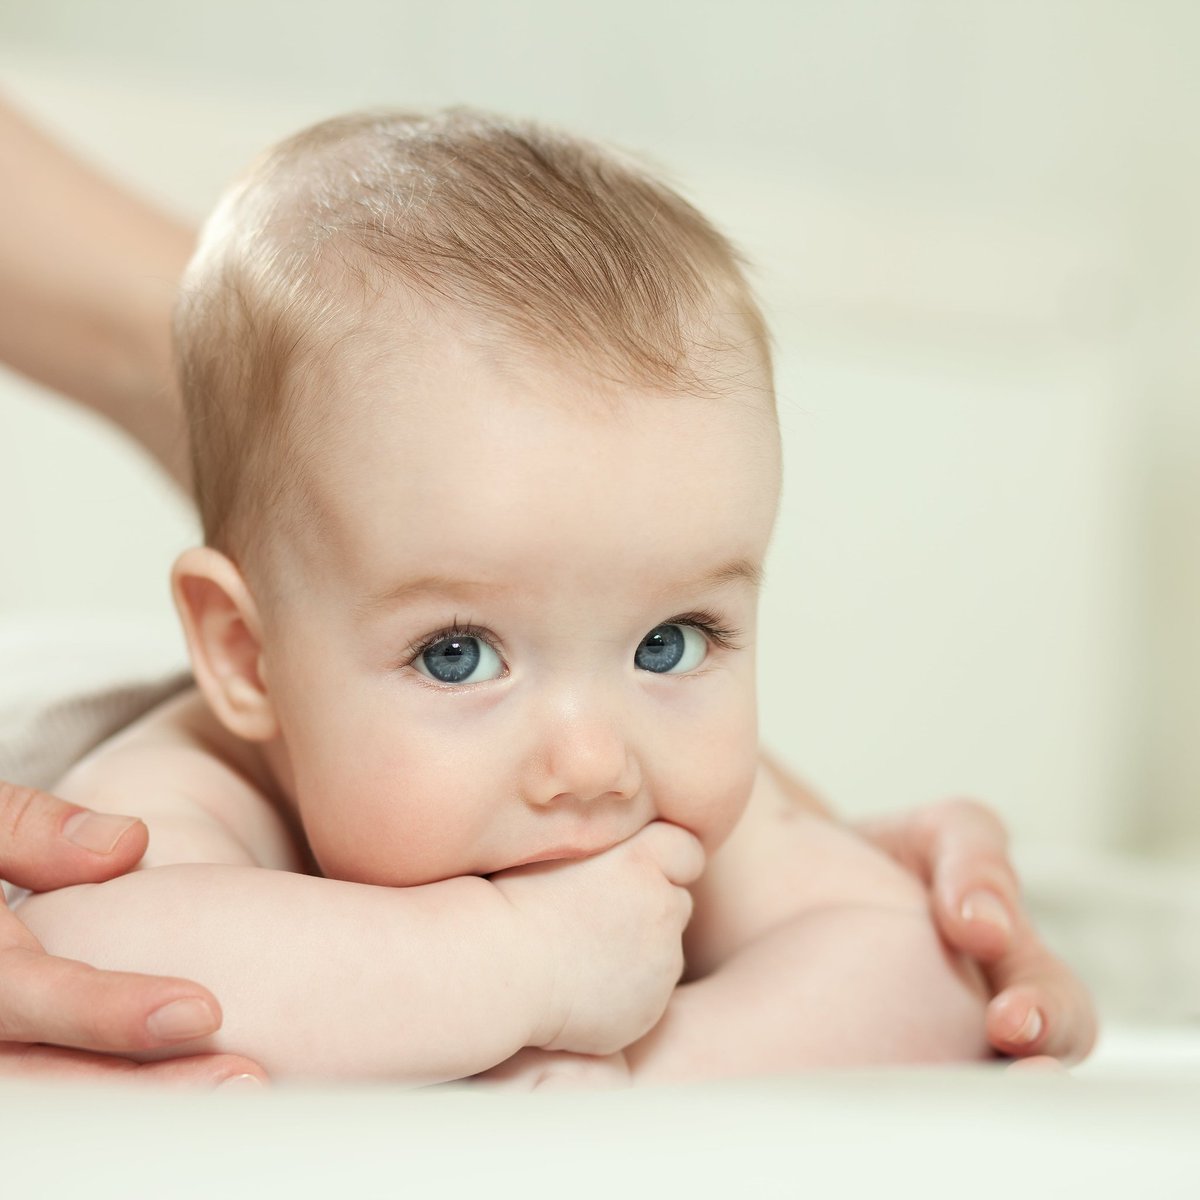 Baby massage online class now available for all mums and dads .
#benefitstoskin #benefitstohealth #babybedtime #bettersleep #closerbond #relaxbaby #relaxparent